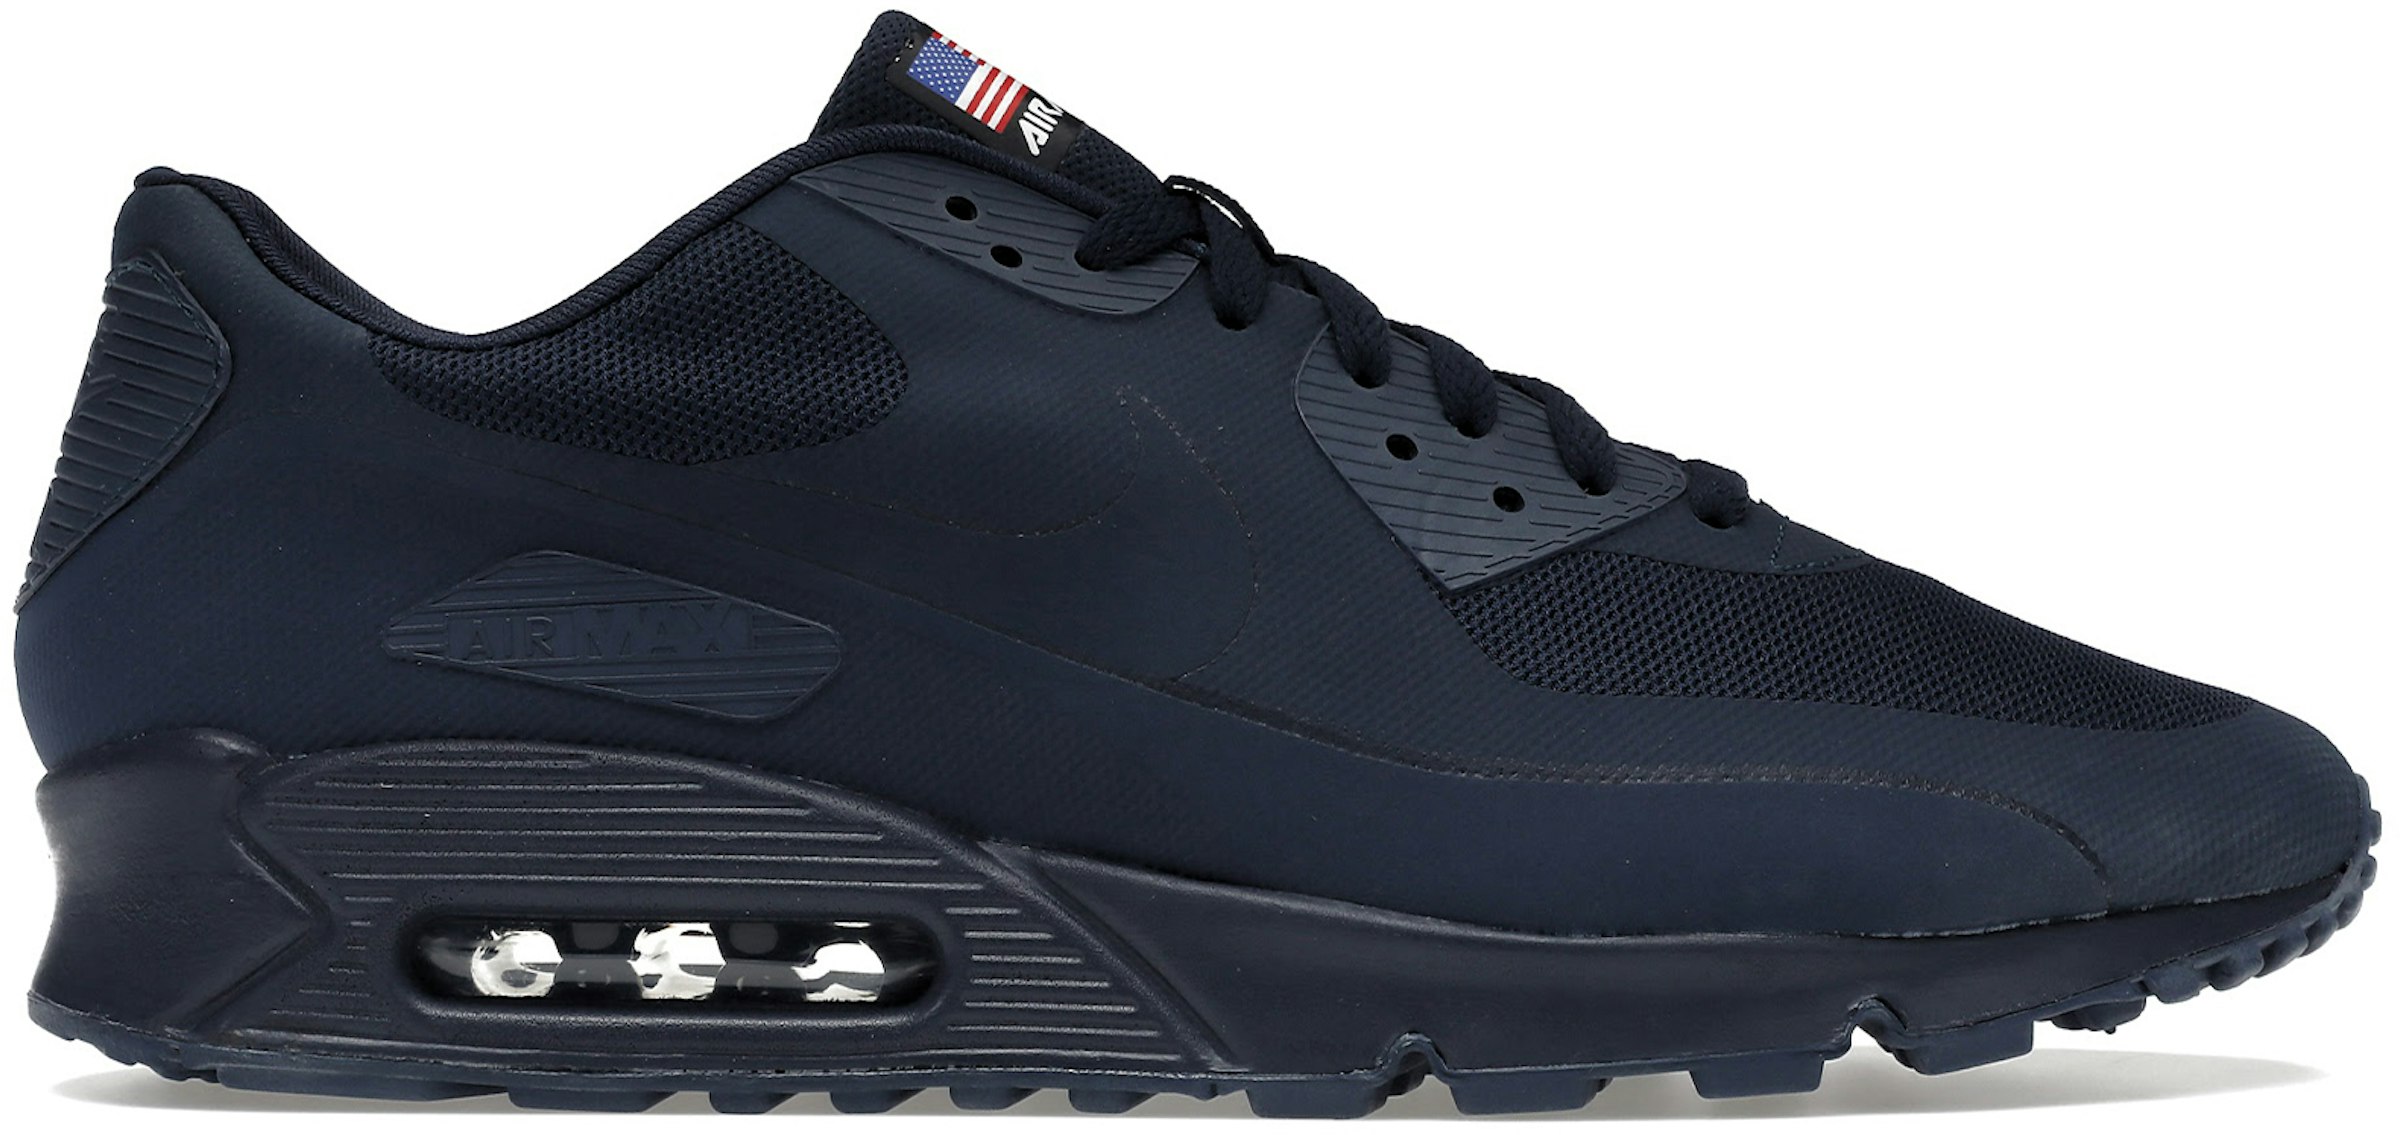 Dato Oceano formación Nike Air Max 90 Hyperfuse Independence Day Blue Men's - 613841-440 - US